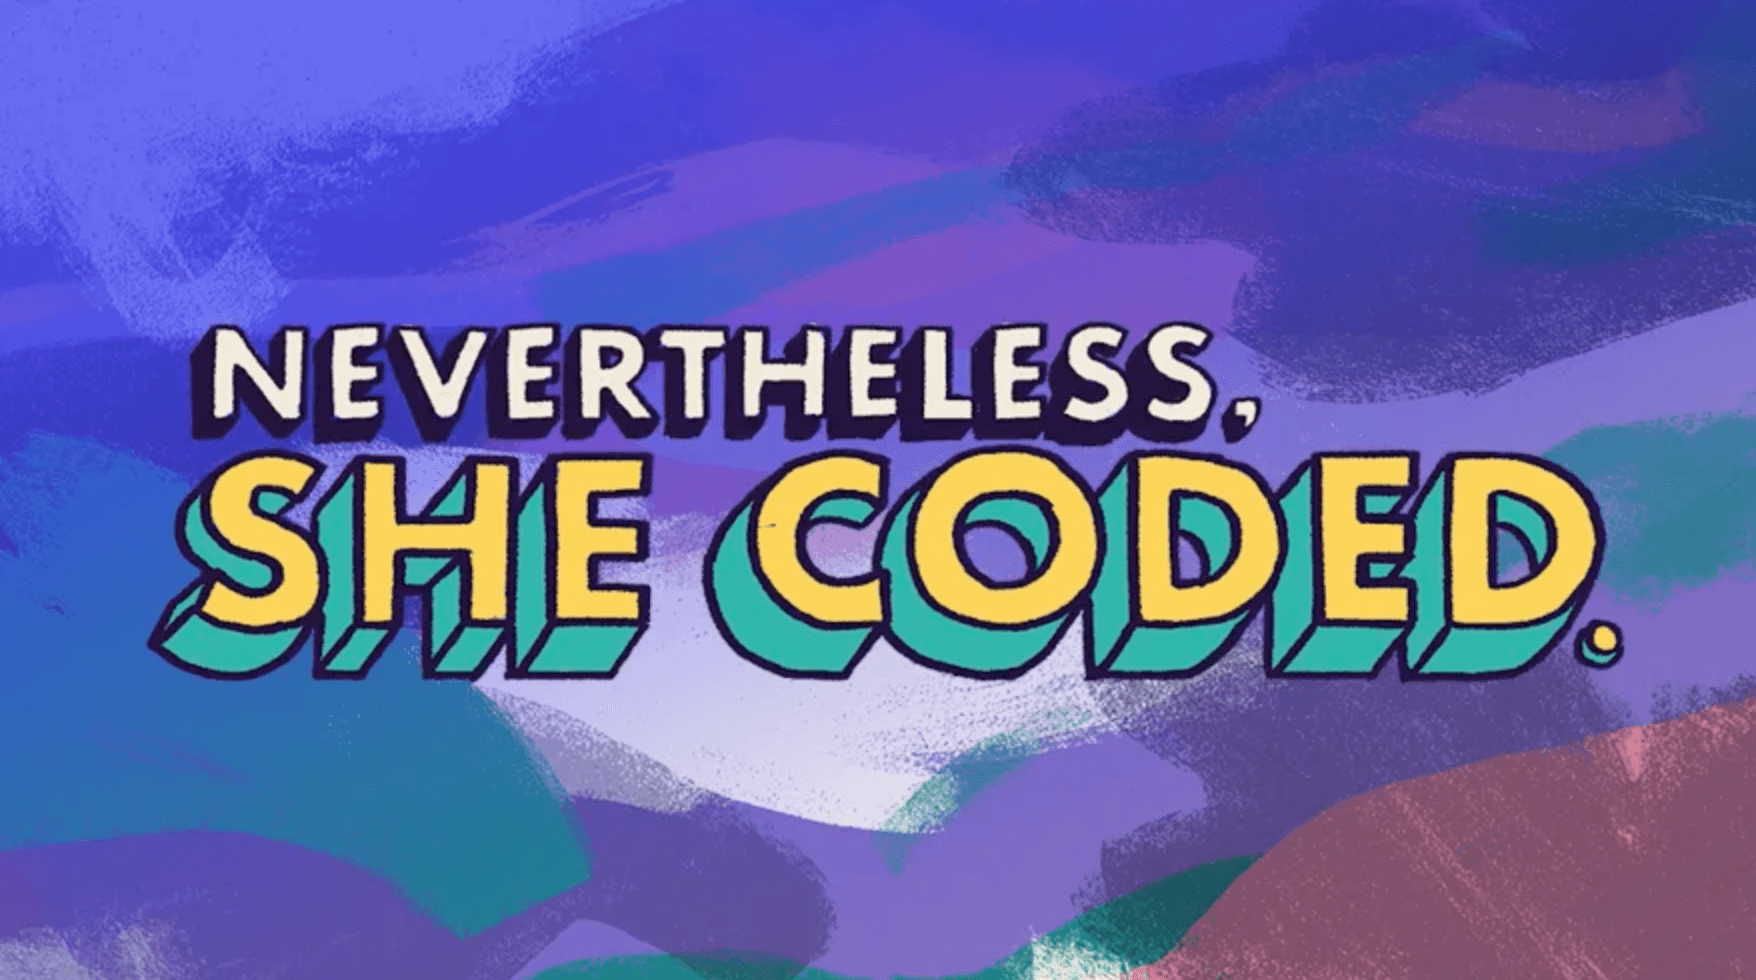 Nevertheless, she coded.